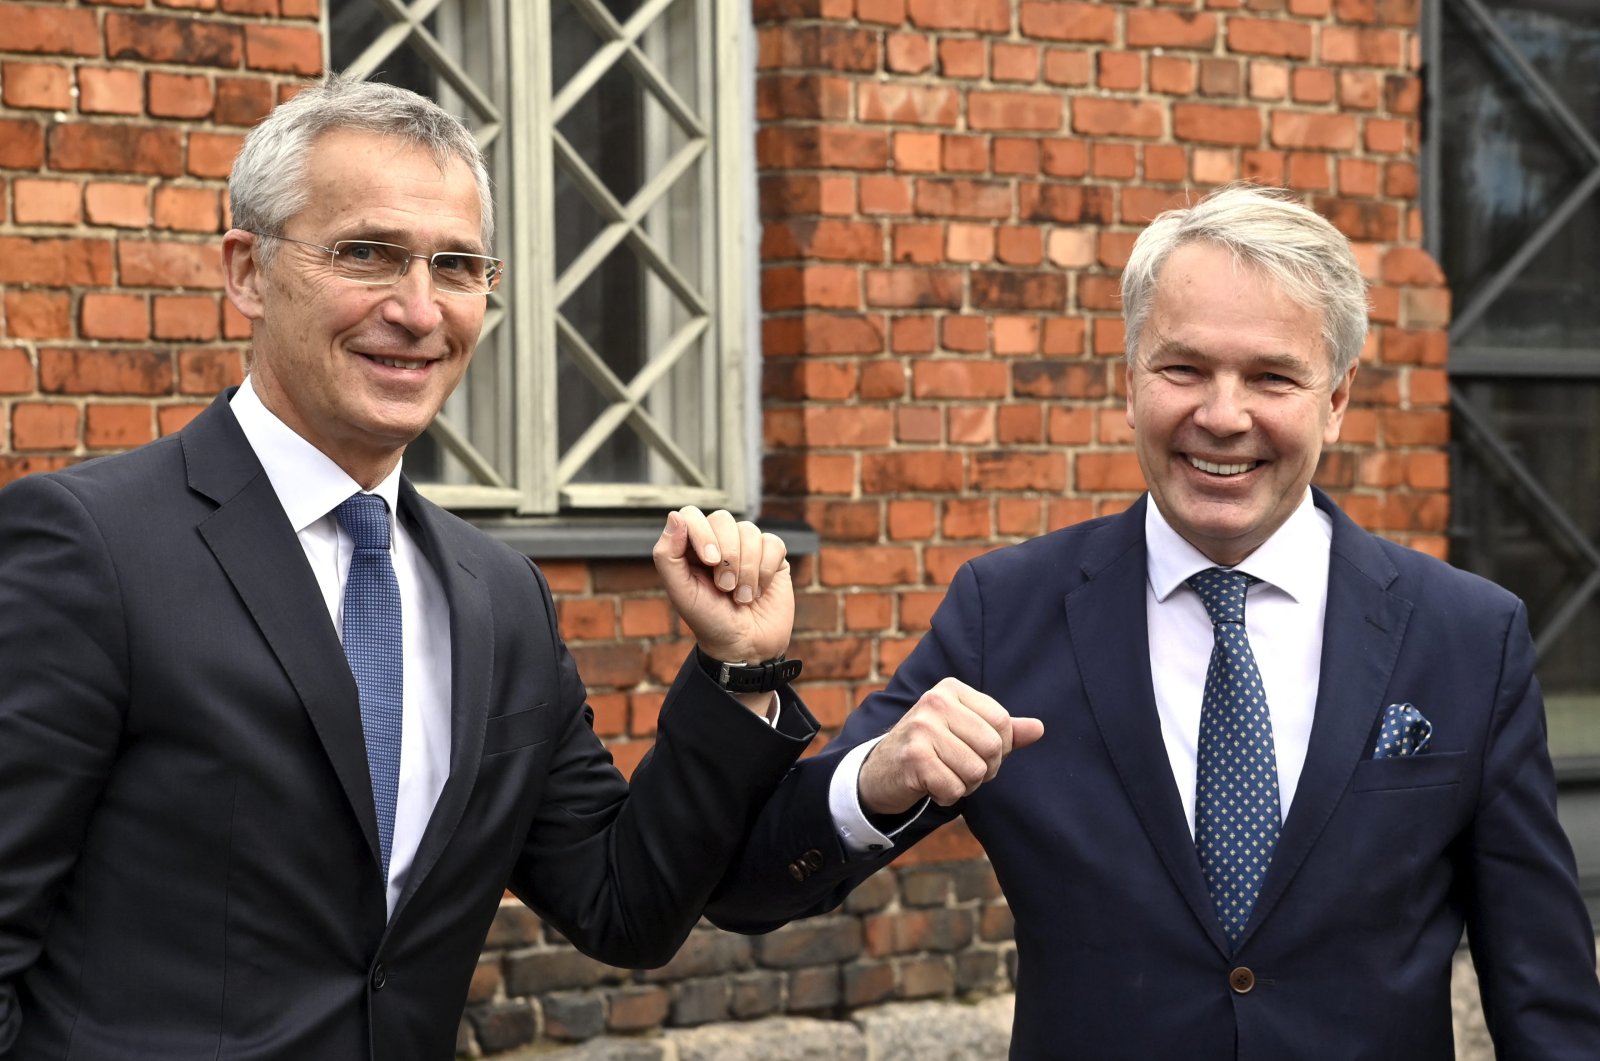 NATO Secretary General Jens Stoltenberg bumps elbows with Finnish Minister of Foreign Affairs Pekka Haavisto (R) during the visit of the North Atlantic Council (NAC) in Helsinki, Finland, Oct. 25, 2021 (AFP File Photo)